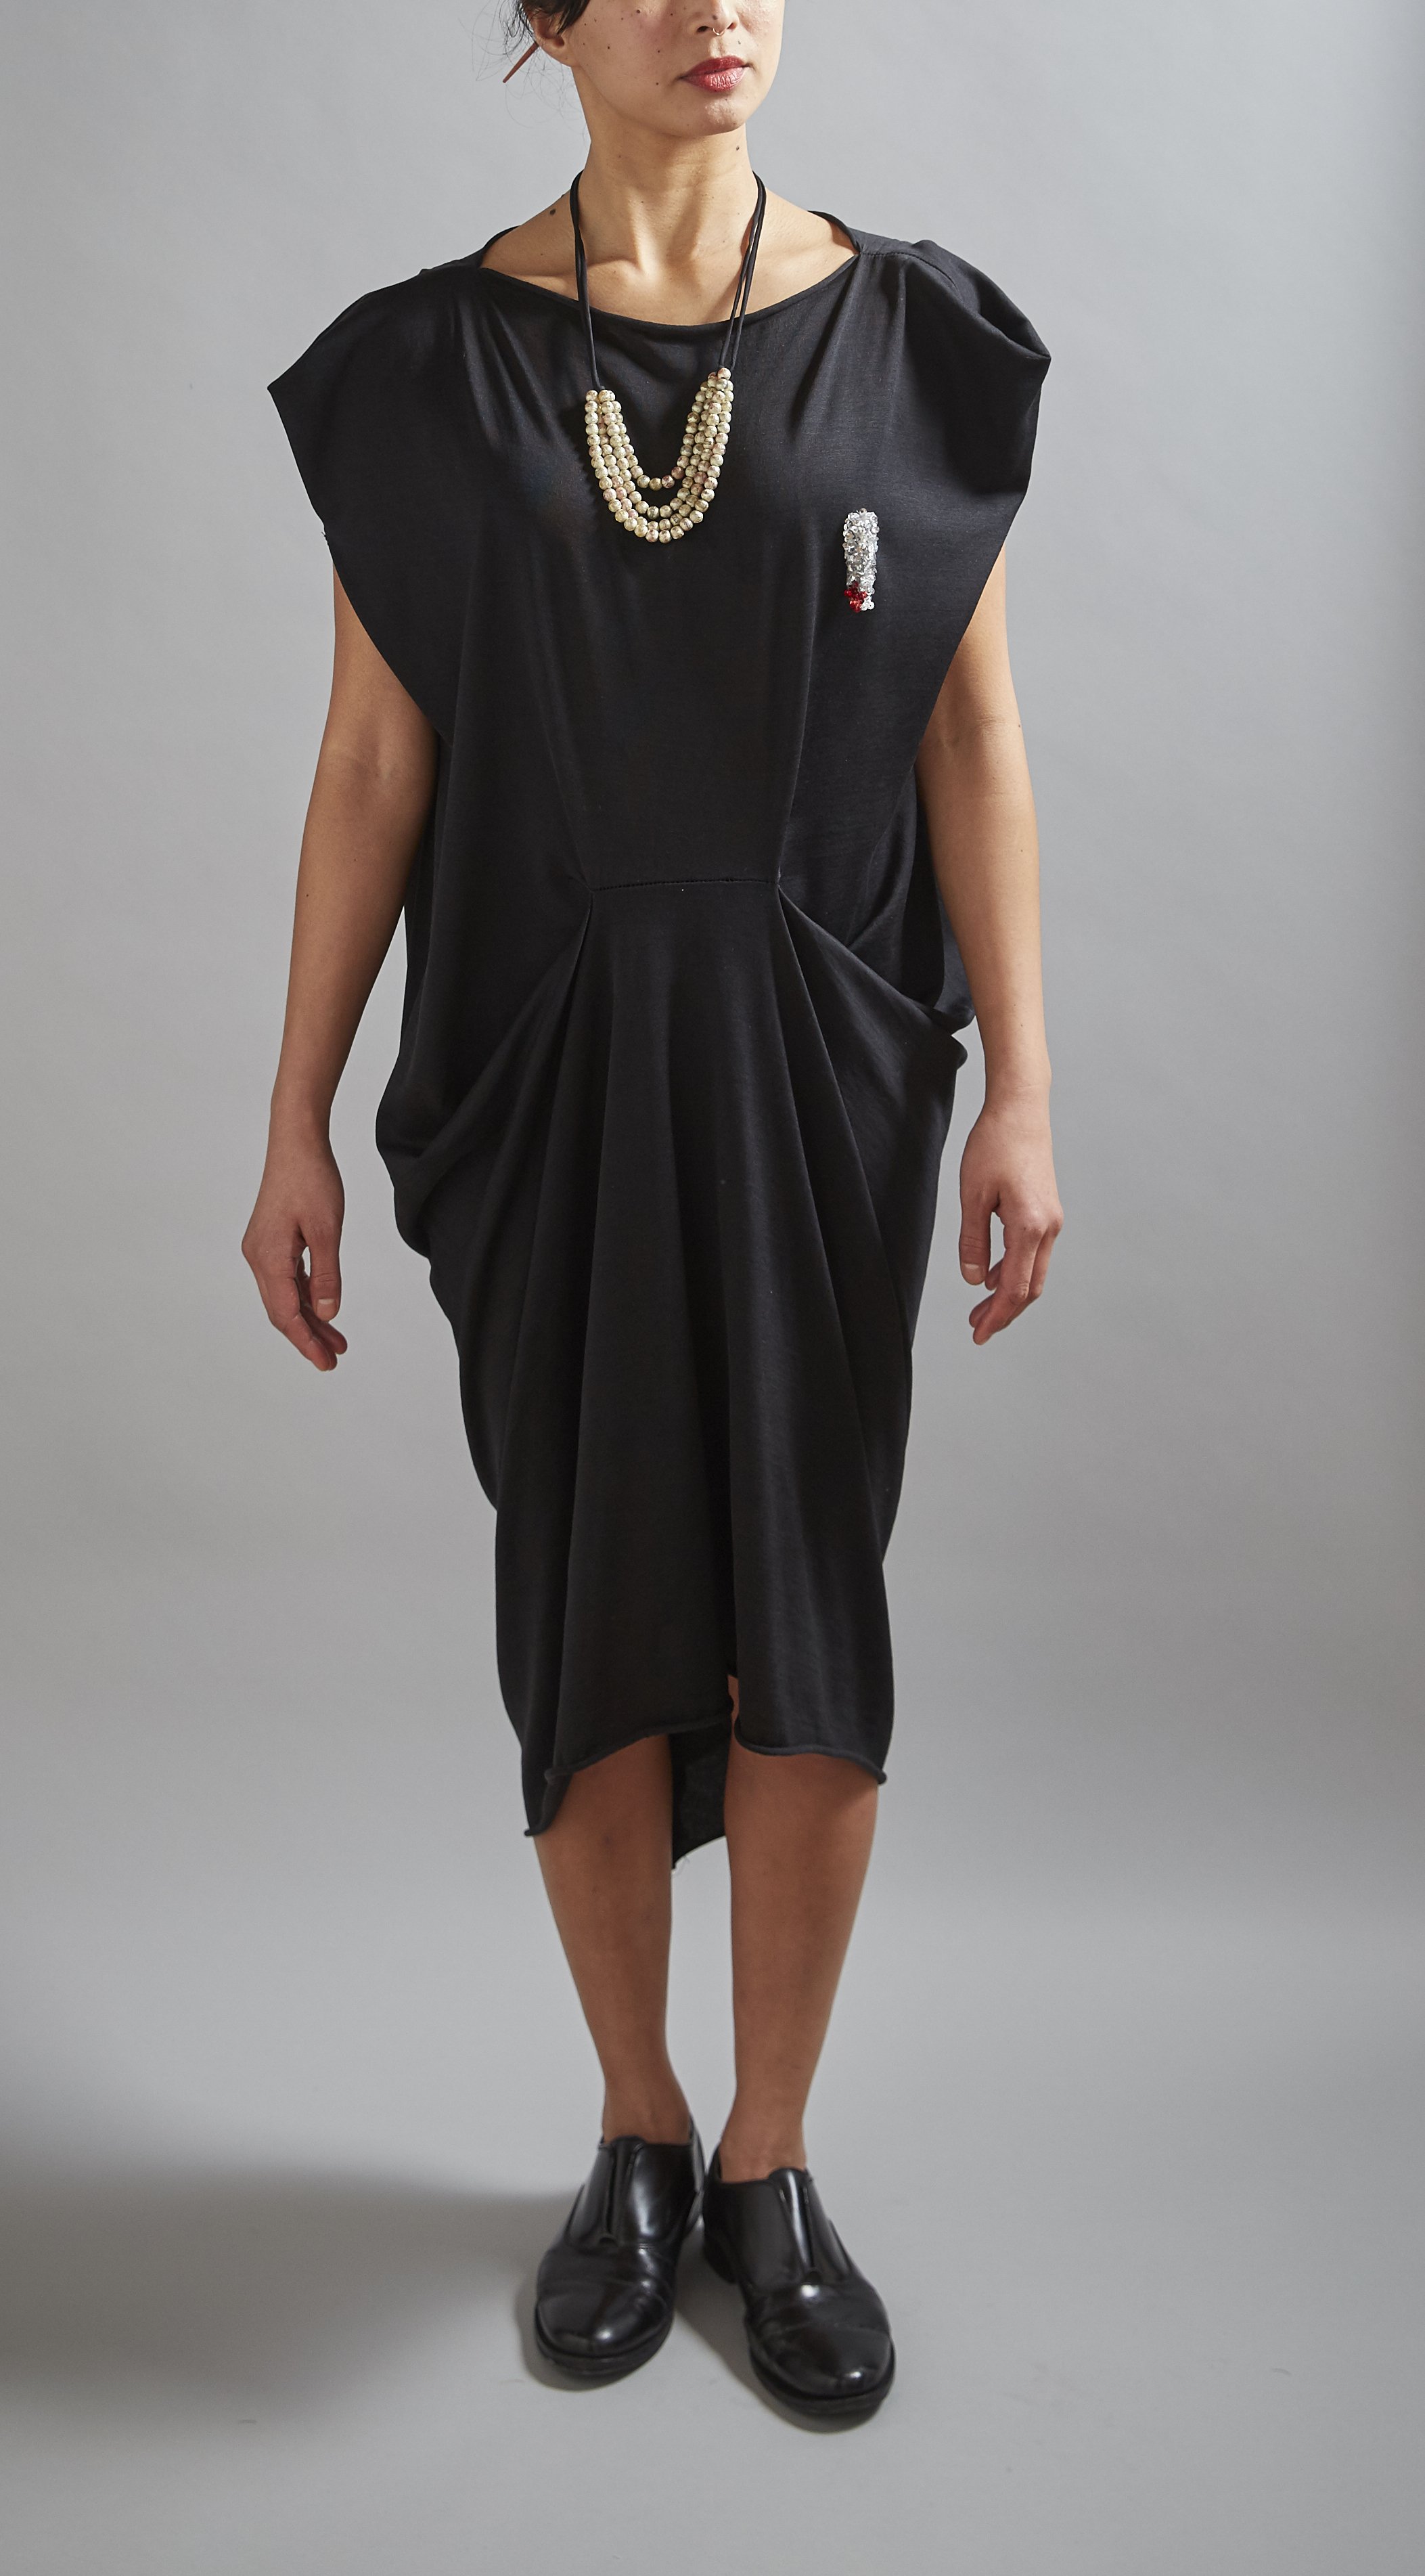 draped dress with acessories.jpg